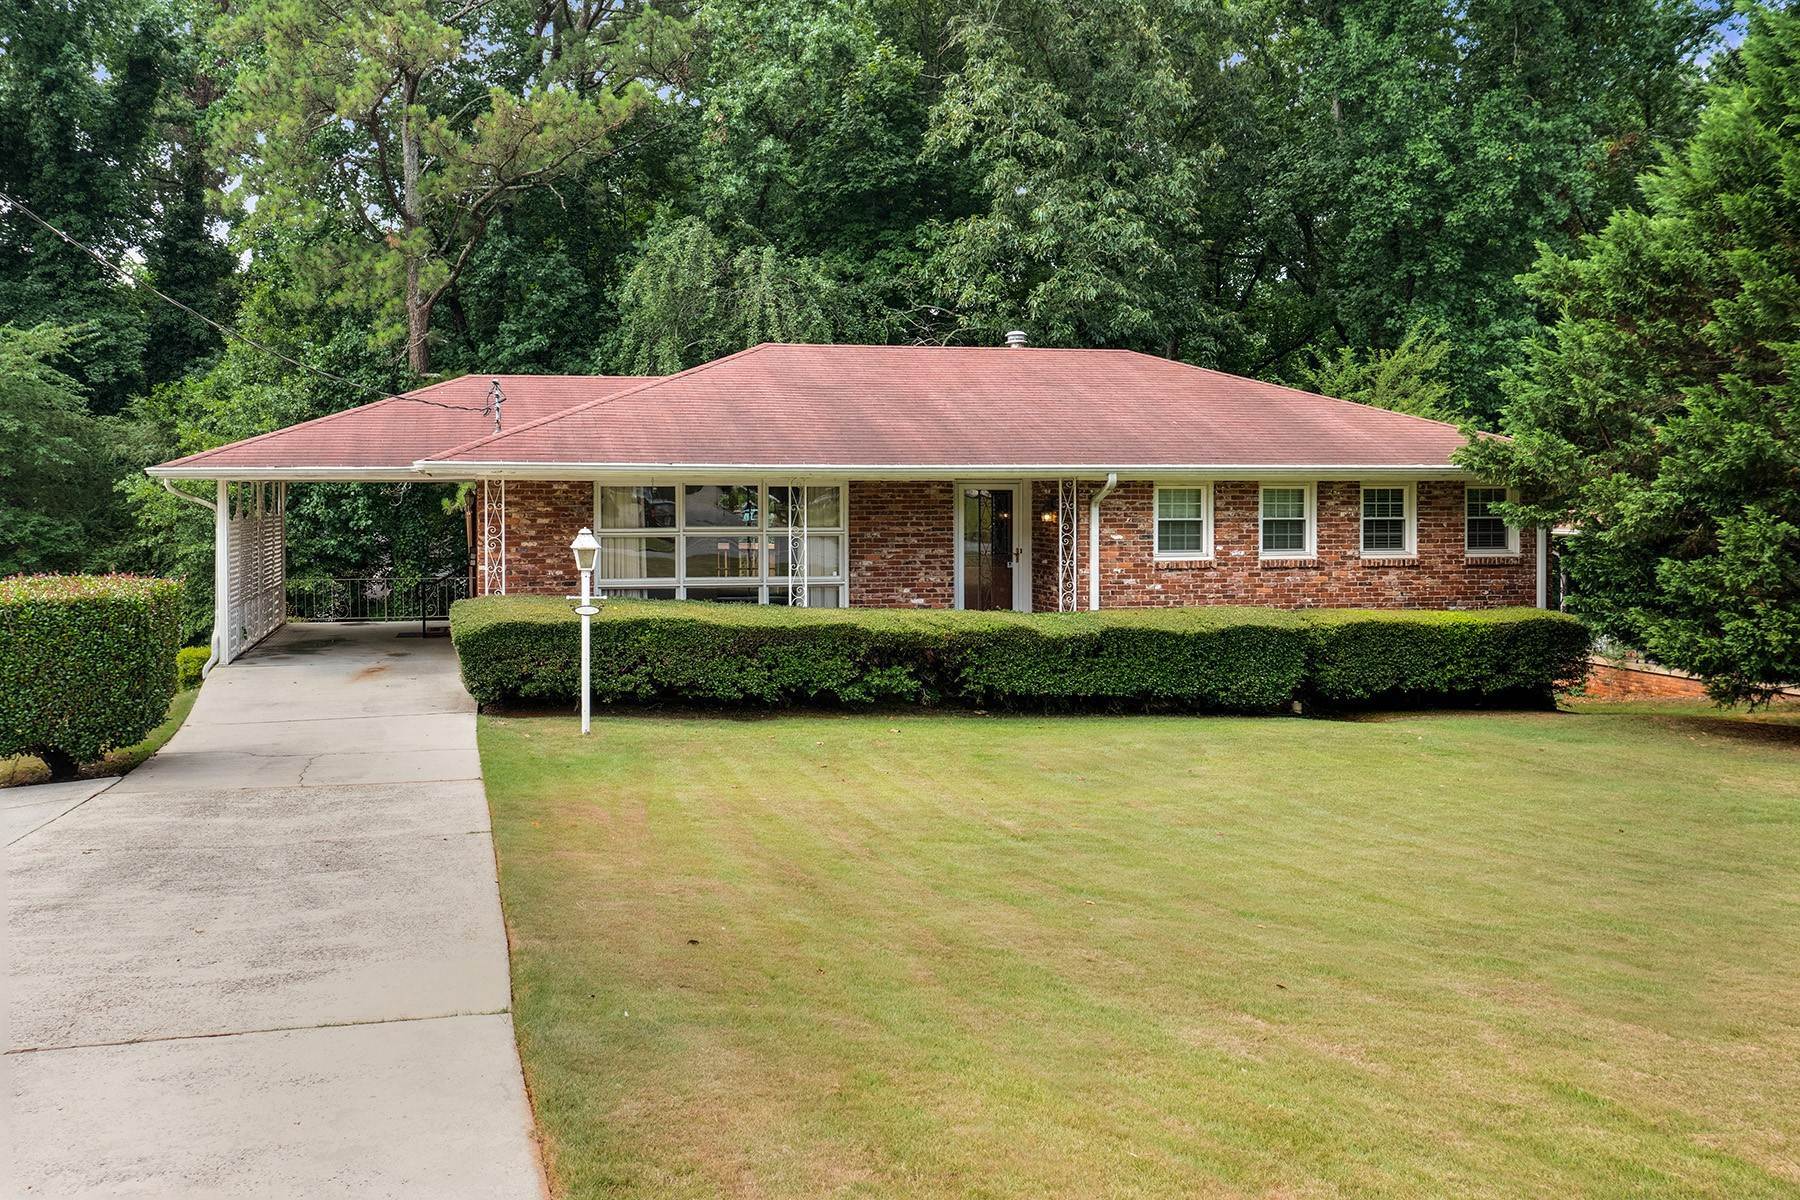 Property for Sale at Charming All-Brick Ranch On Basement! Move In Or Customize Your Dream Home! 3750 Carole Drive Doraville, Georgia 30340 United States